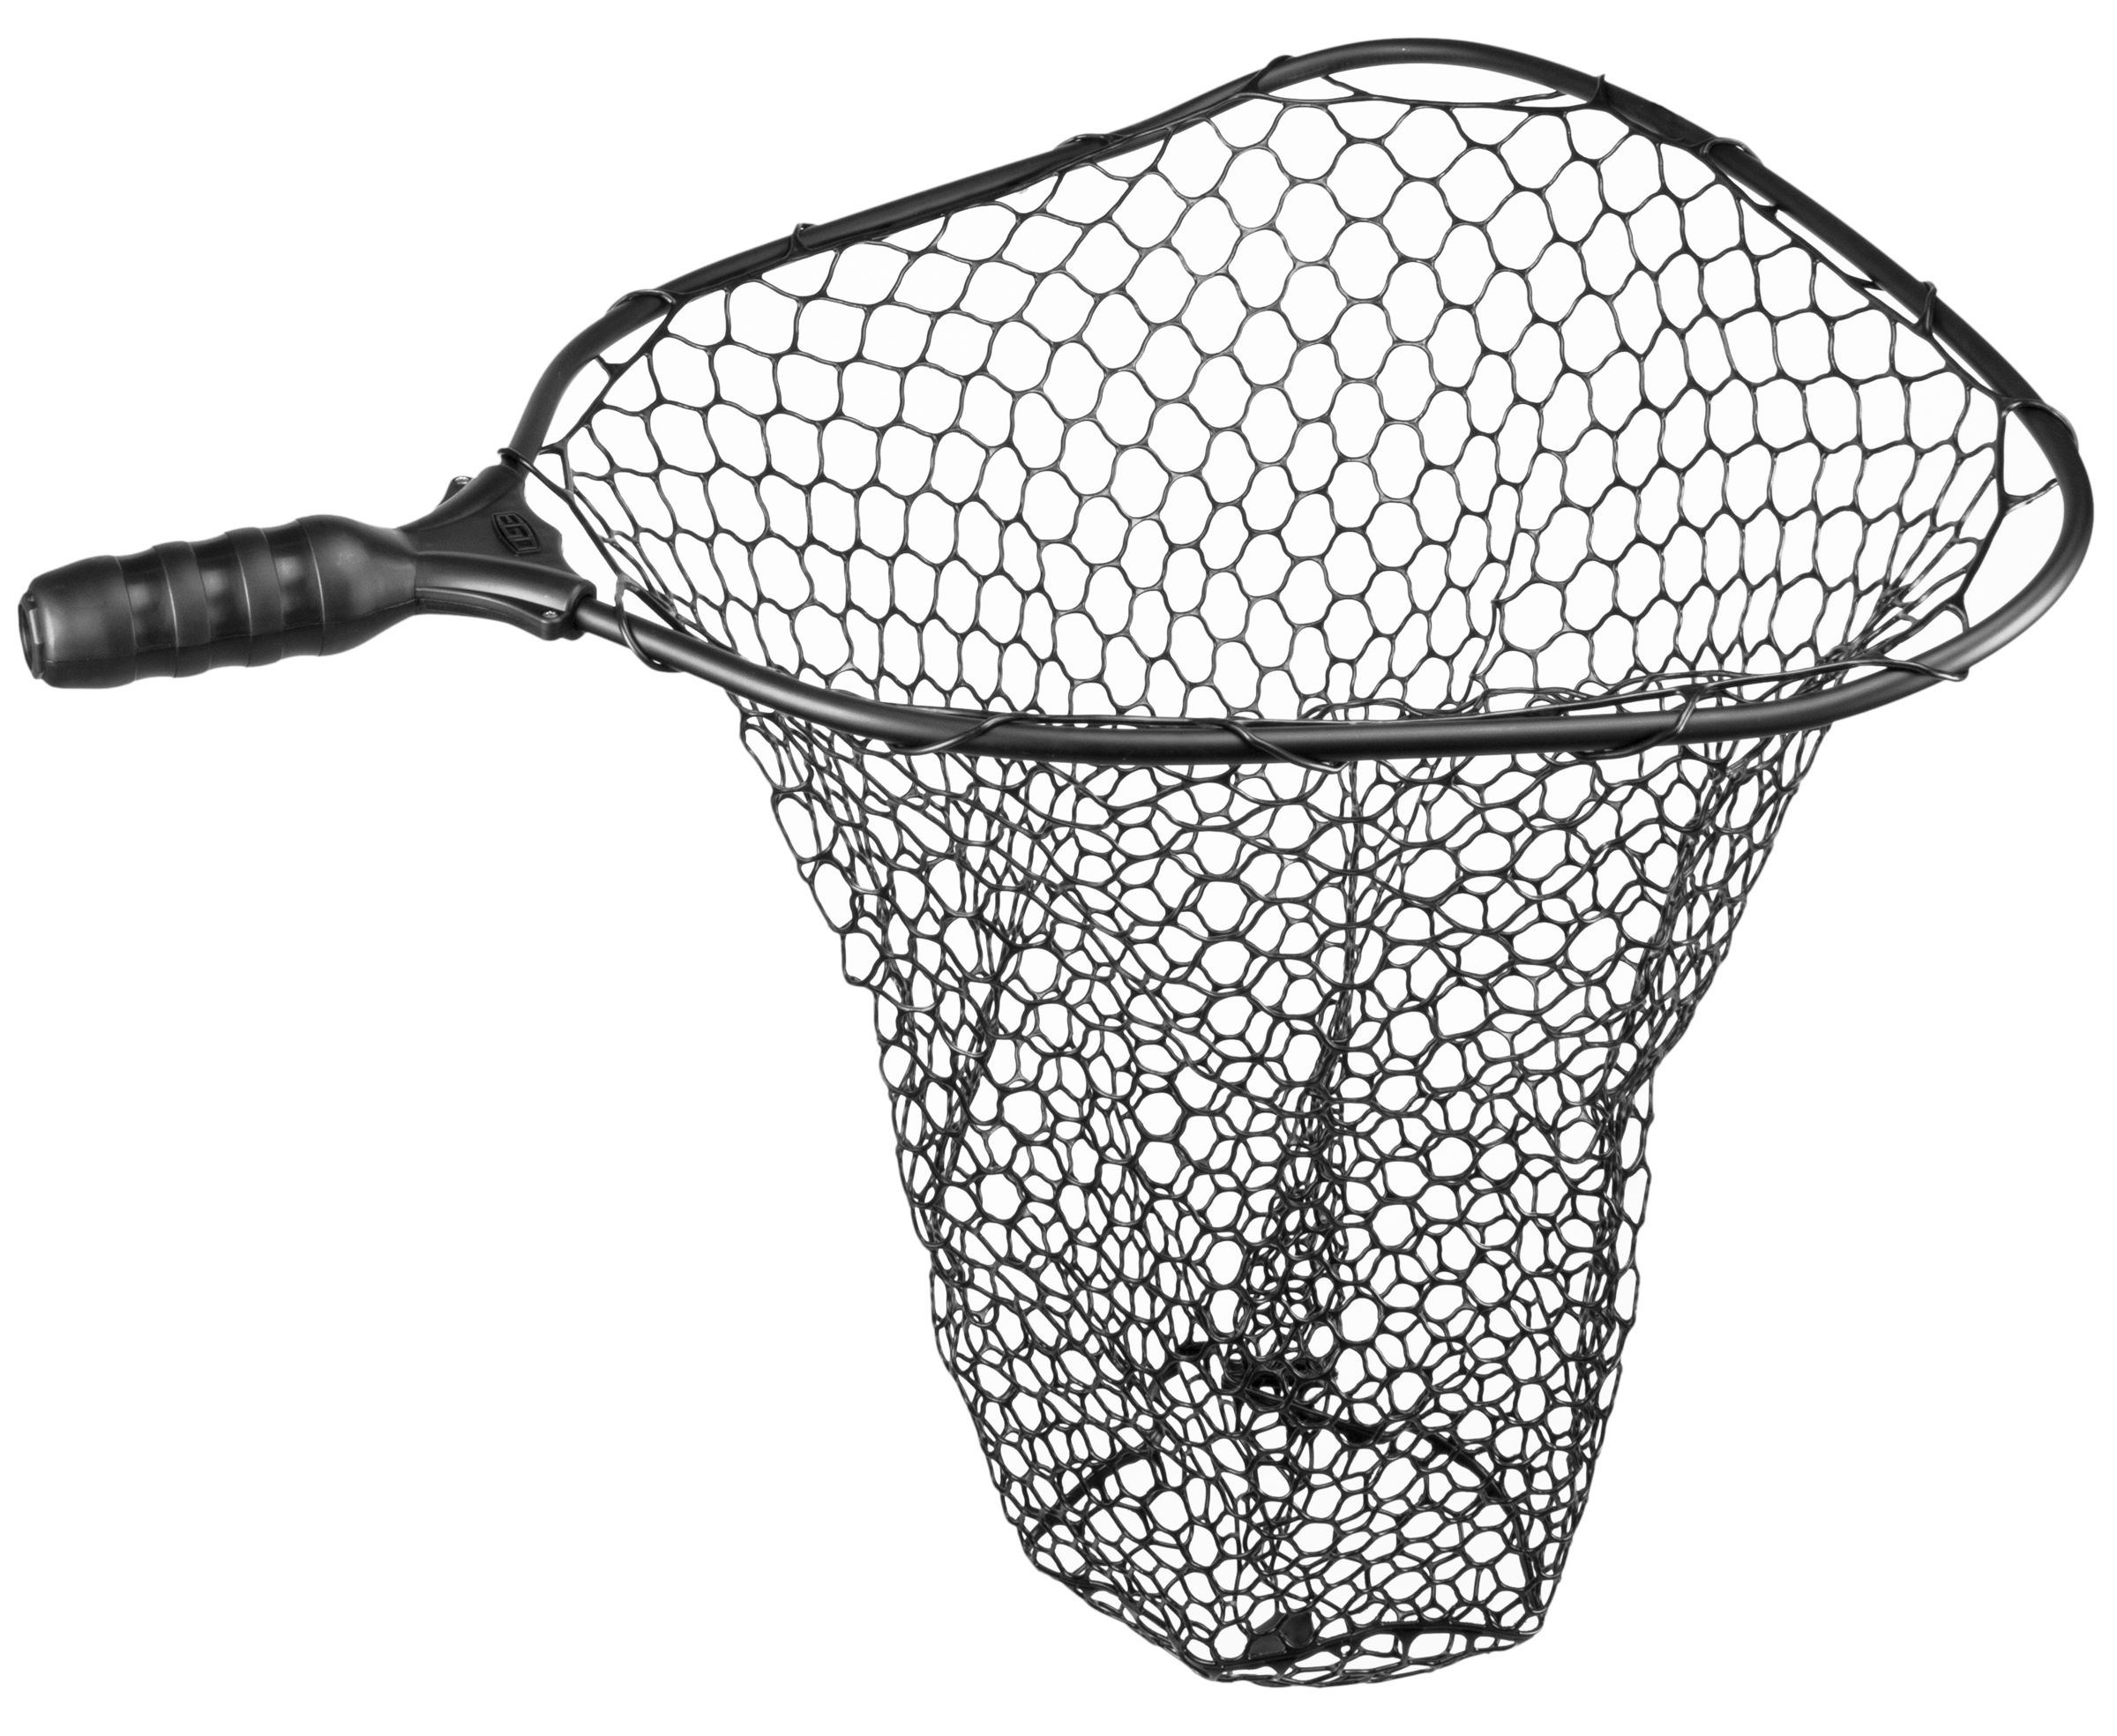 EGO Fishing S2 Large 22in Deep Rubber Net Head 72036A , $5.10 Off